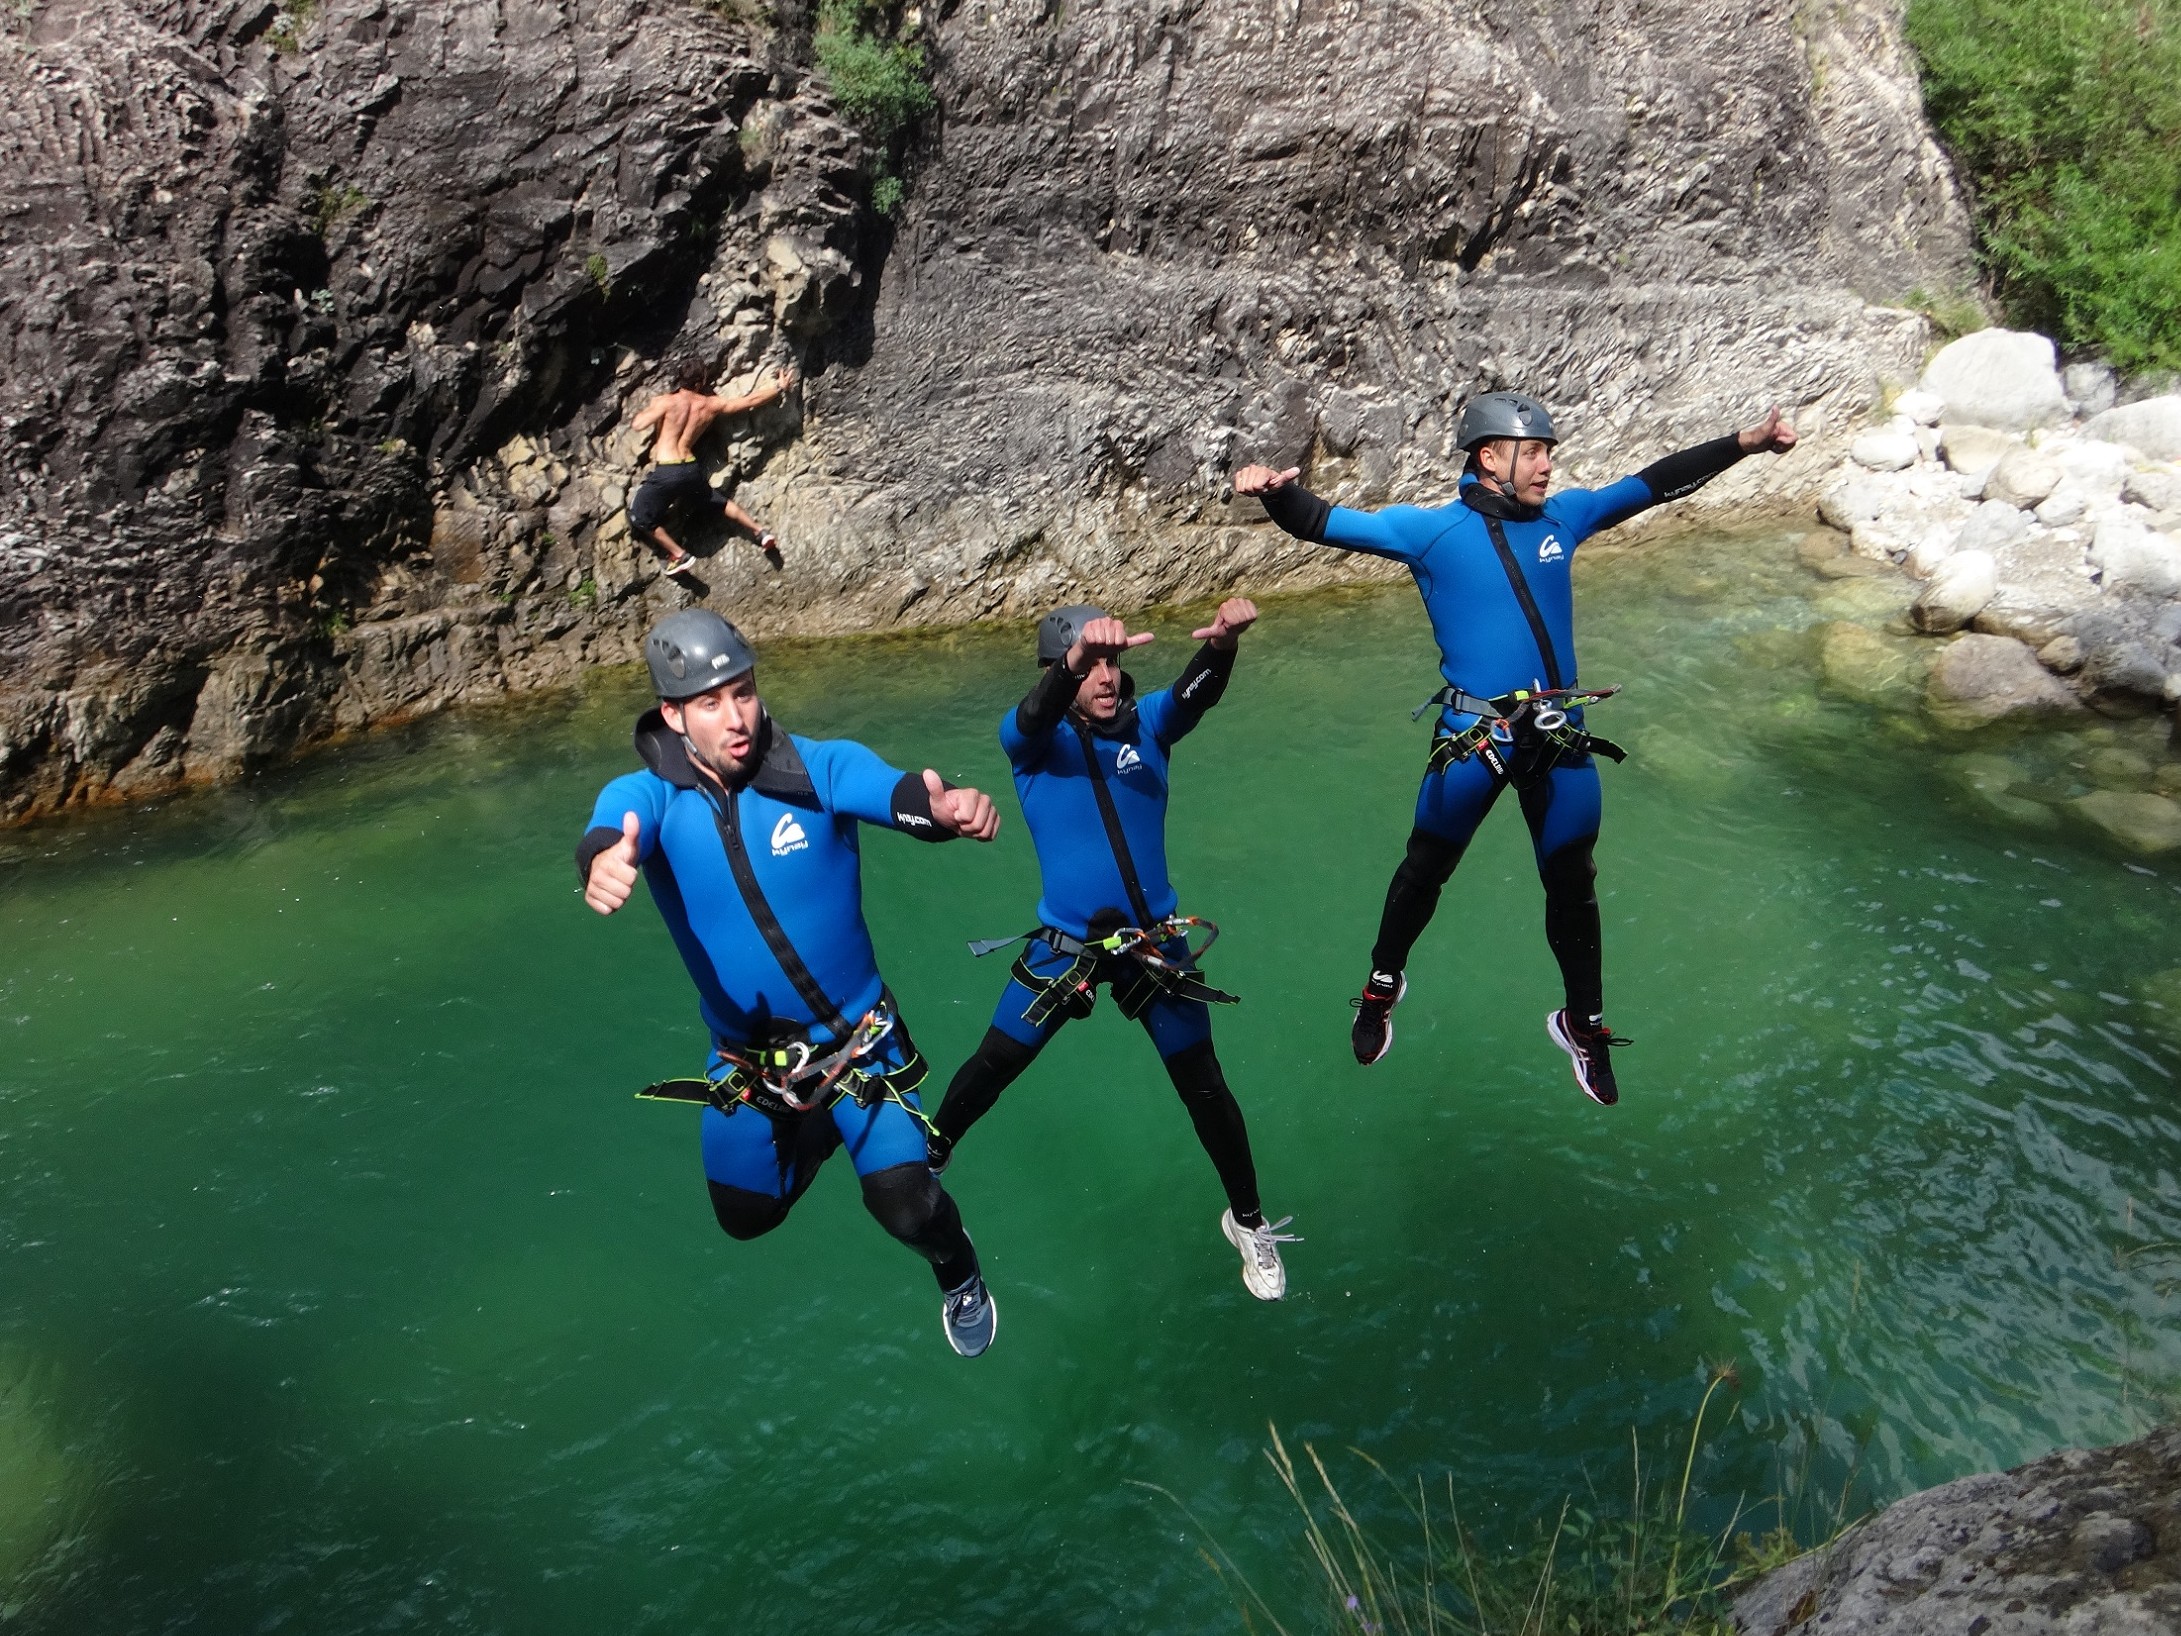 <p>CANYONING NIVEAU <span style="font-size:18px"><strong><span style="font-family:comic sans ms,cursive">2</span></strong></span></p> 